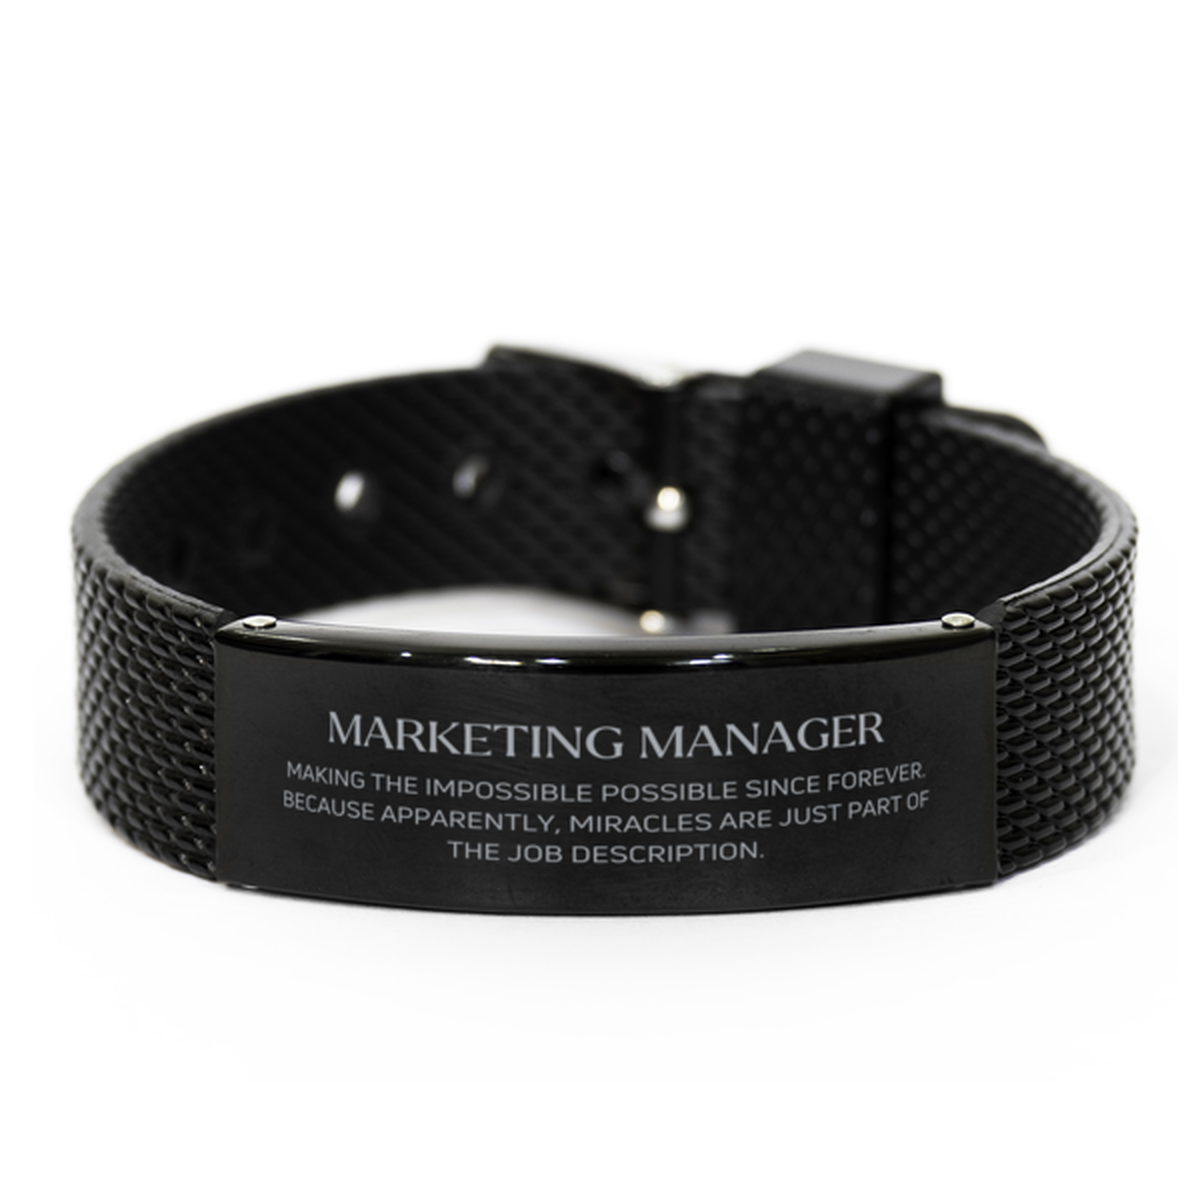 Funny Marketing Manager Gifts, Miracles are just part of the job description, Inspirational Birthday Black Shark Mesh Bracelet For Marketing Manager, Men, Women, Coworkers, Friends, Boss